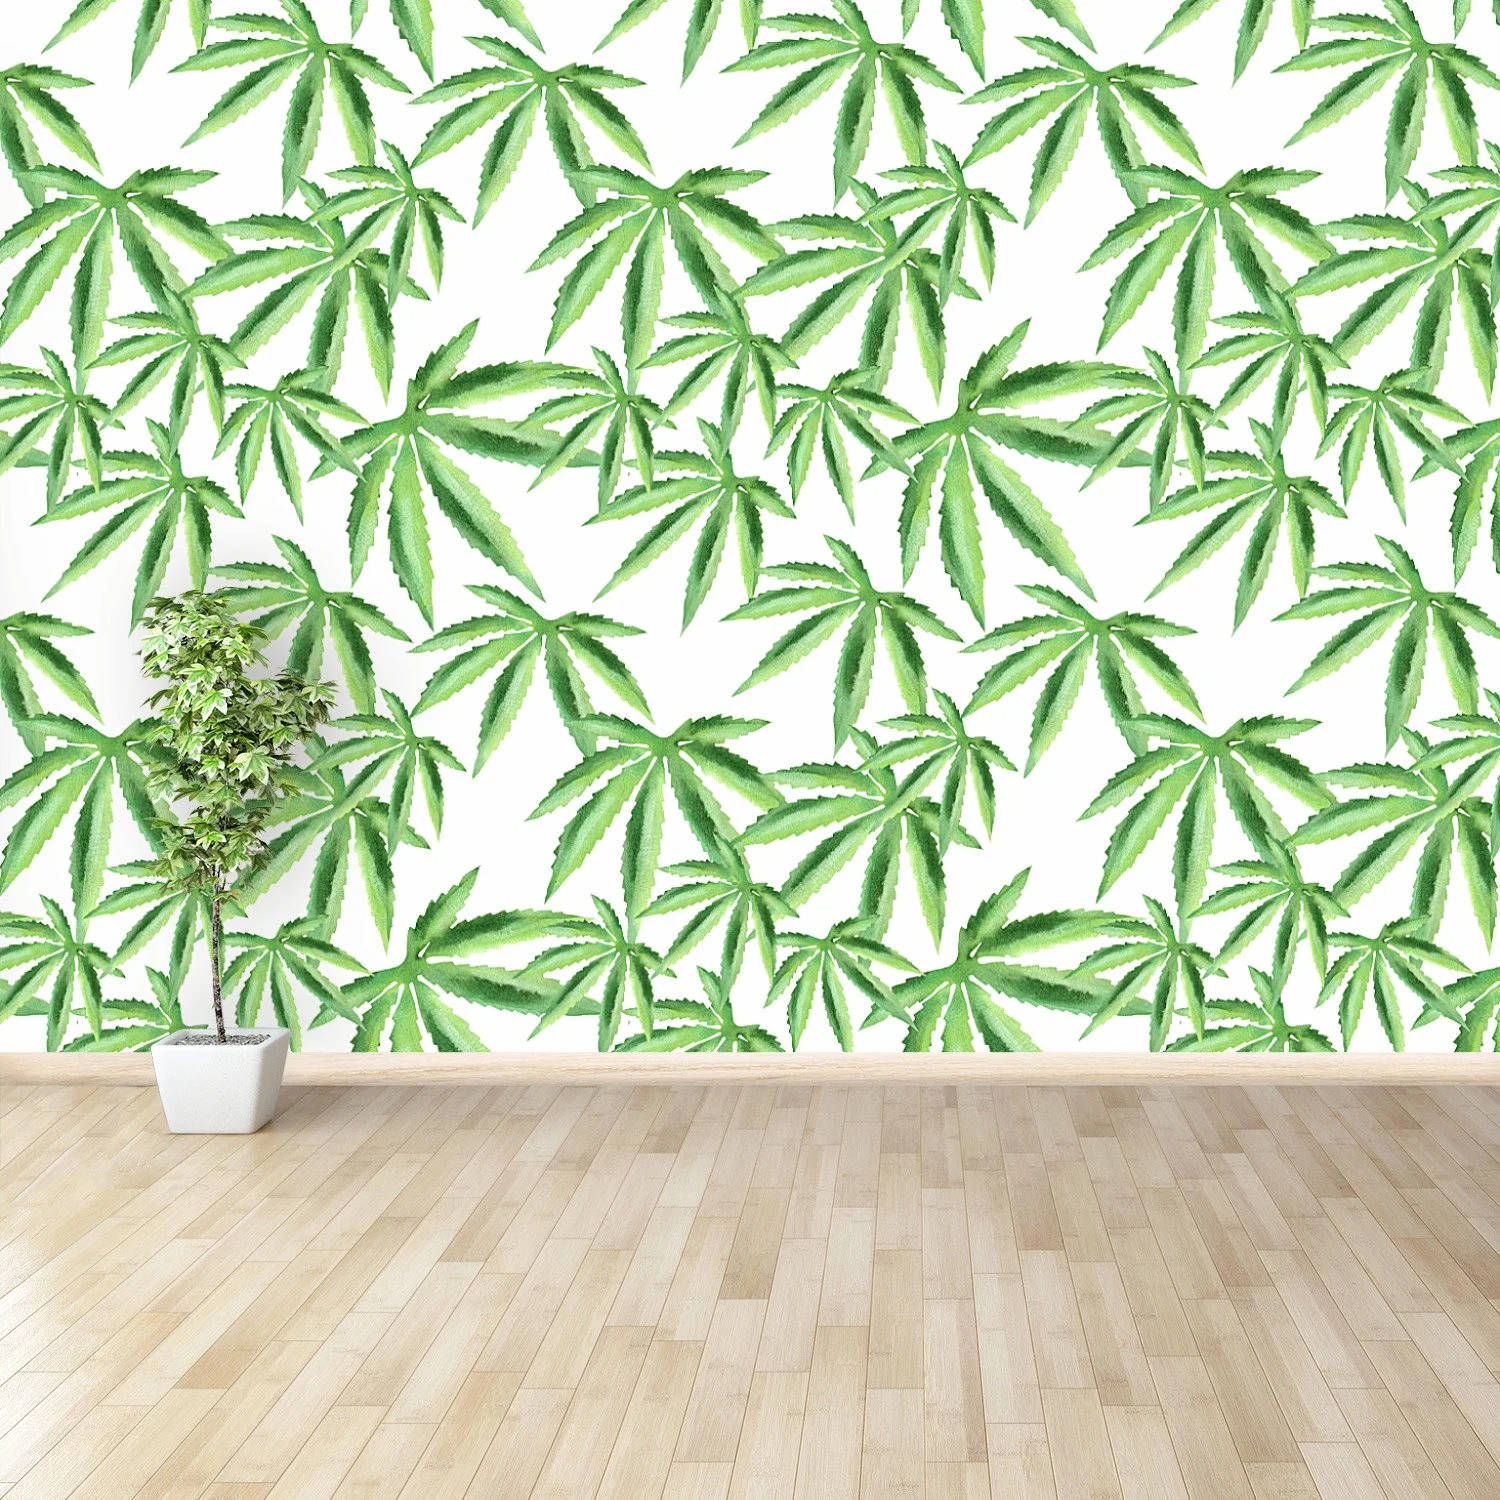 Cool Weed Room Background